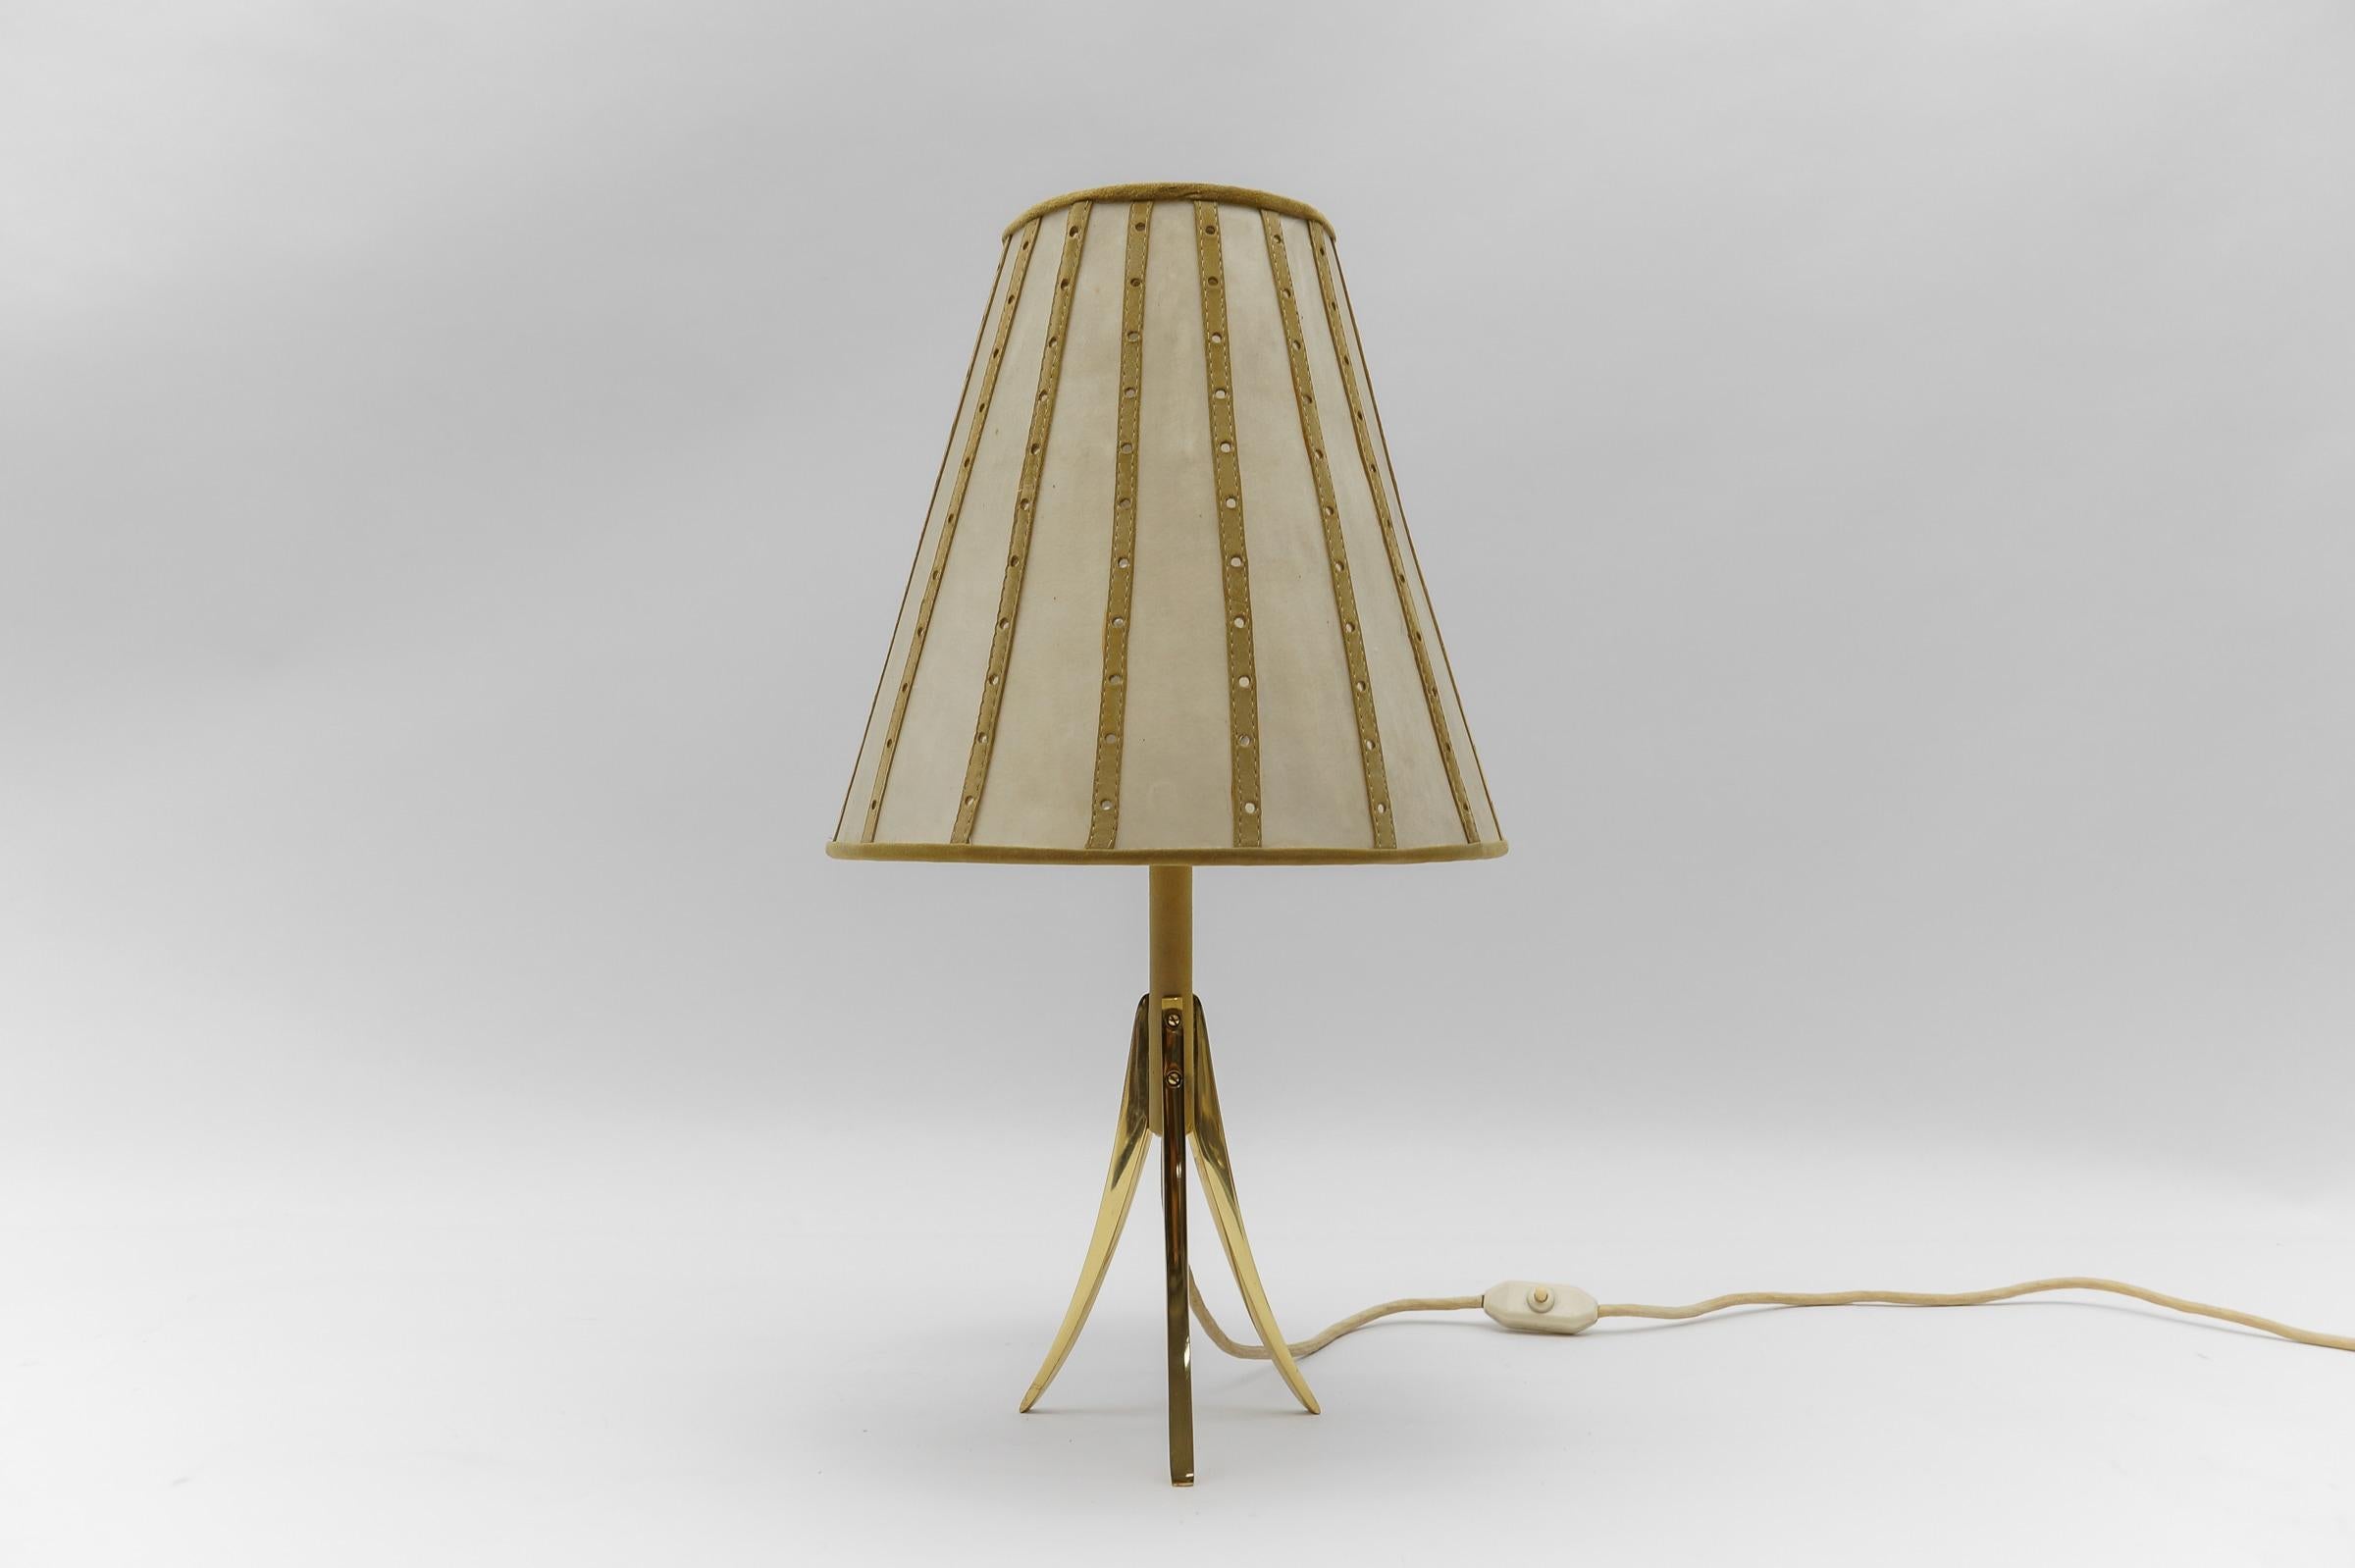 Mid-Century Modern Tripod Table Lamp made in Brass and Leather, 1960s Austria

Dimension
Height: 21.65 in (55 cm)
Width: 11.82 in (30 cm)
Depth: 11.82 in (30 cm)

The lamp needs 1 x E27 / E26 Edison screw fit bulb, is wired, and in working